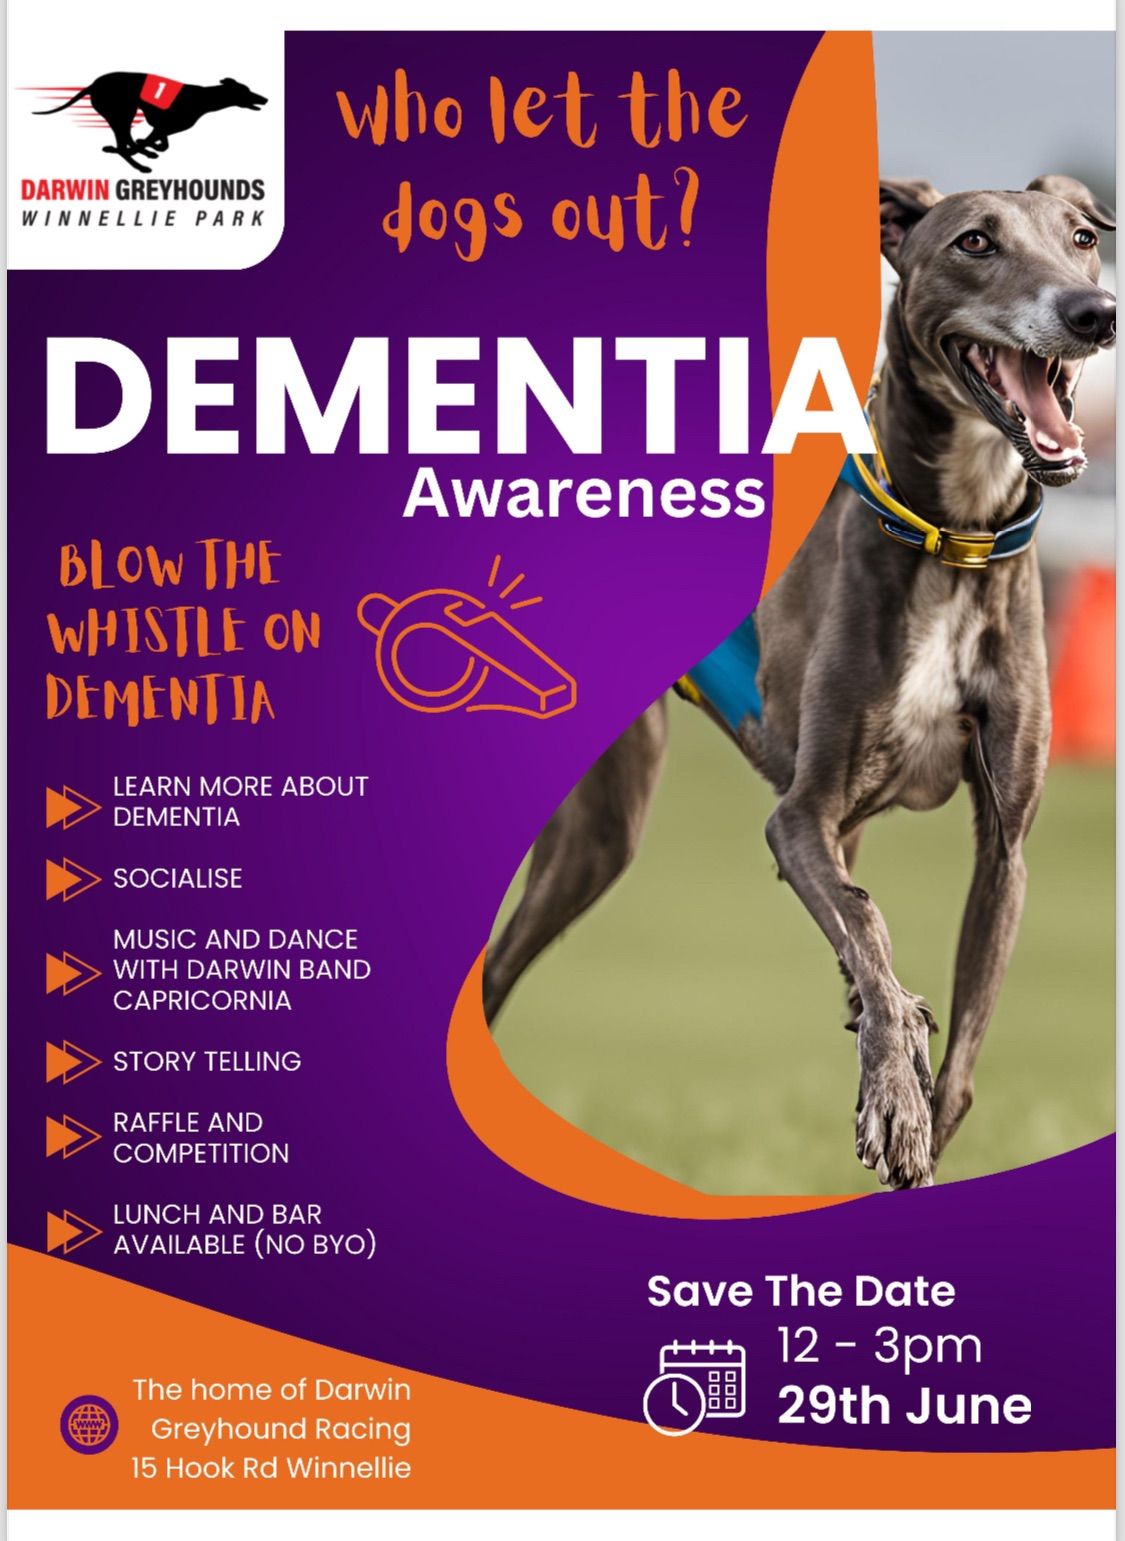 Blowing the Whistle on Dementia Awareness 